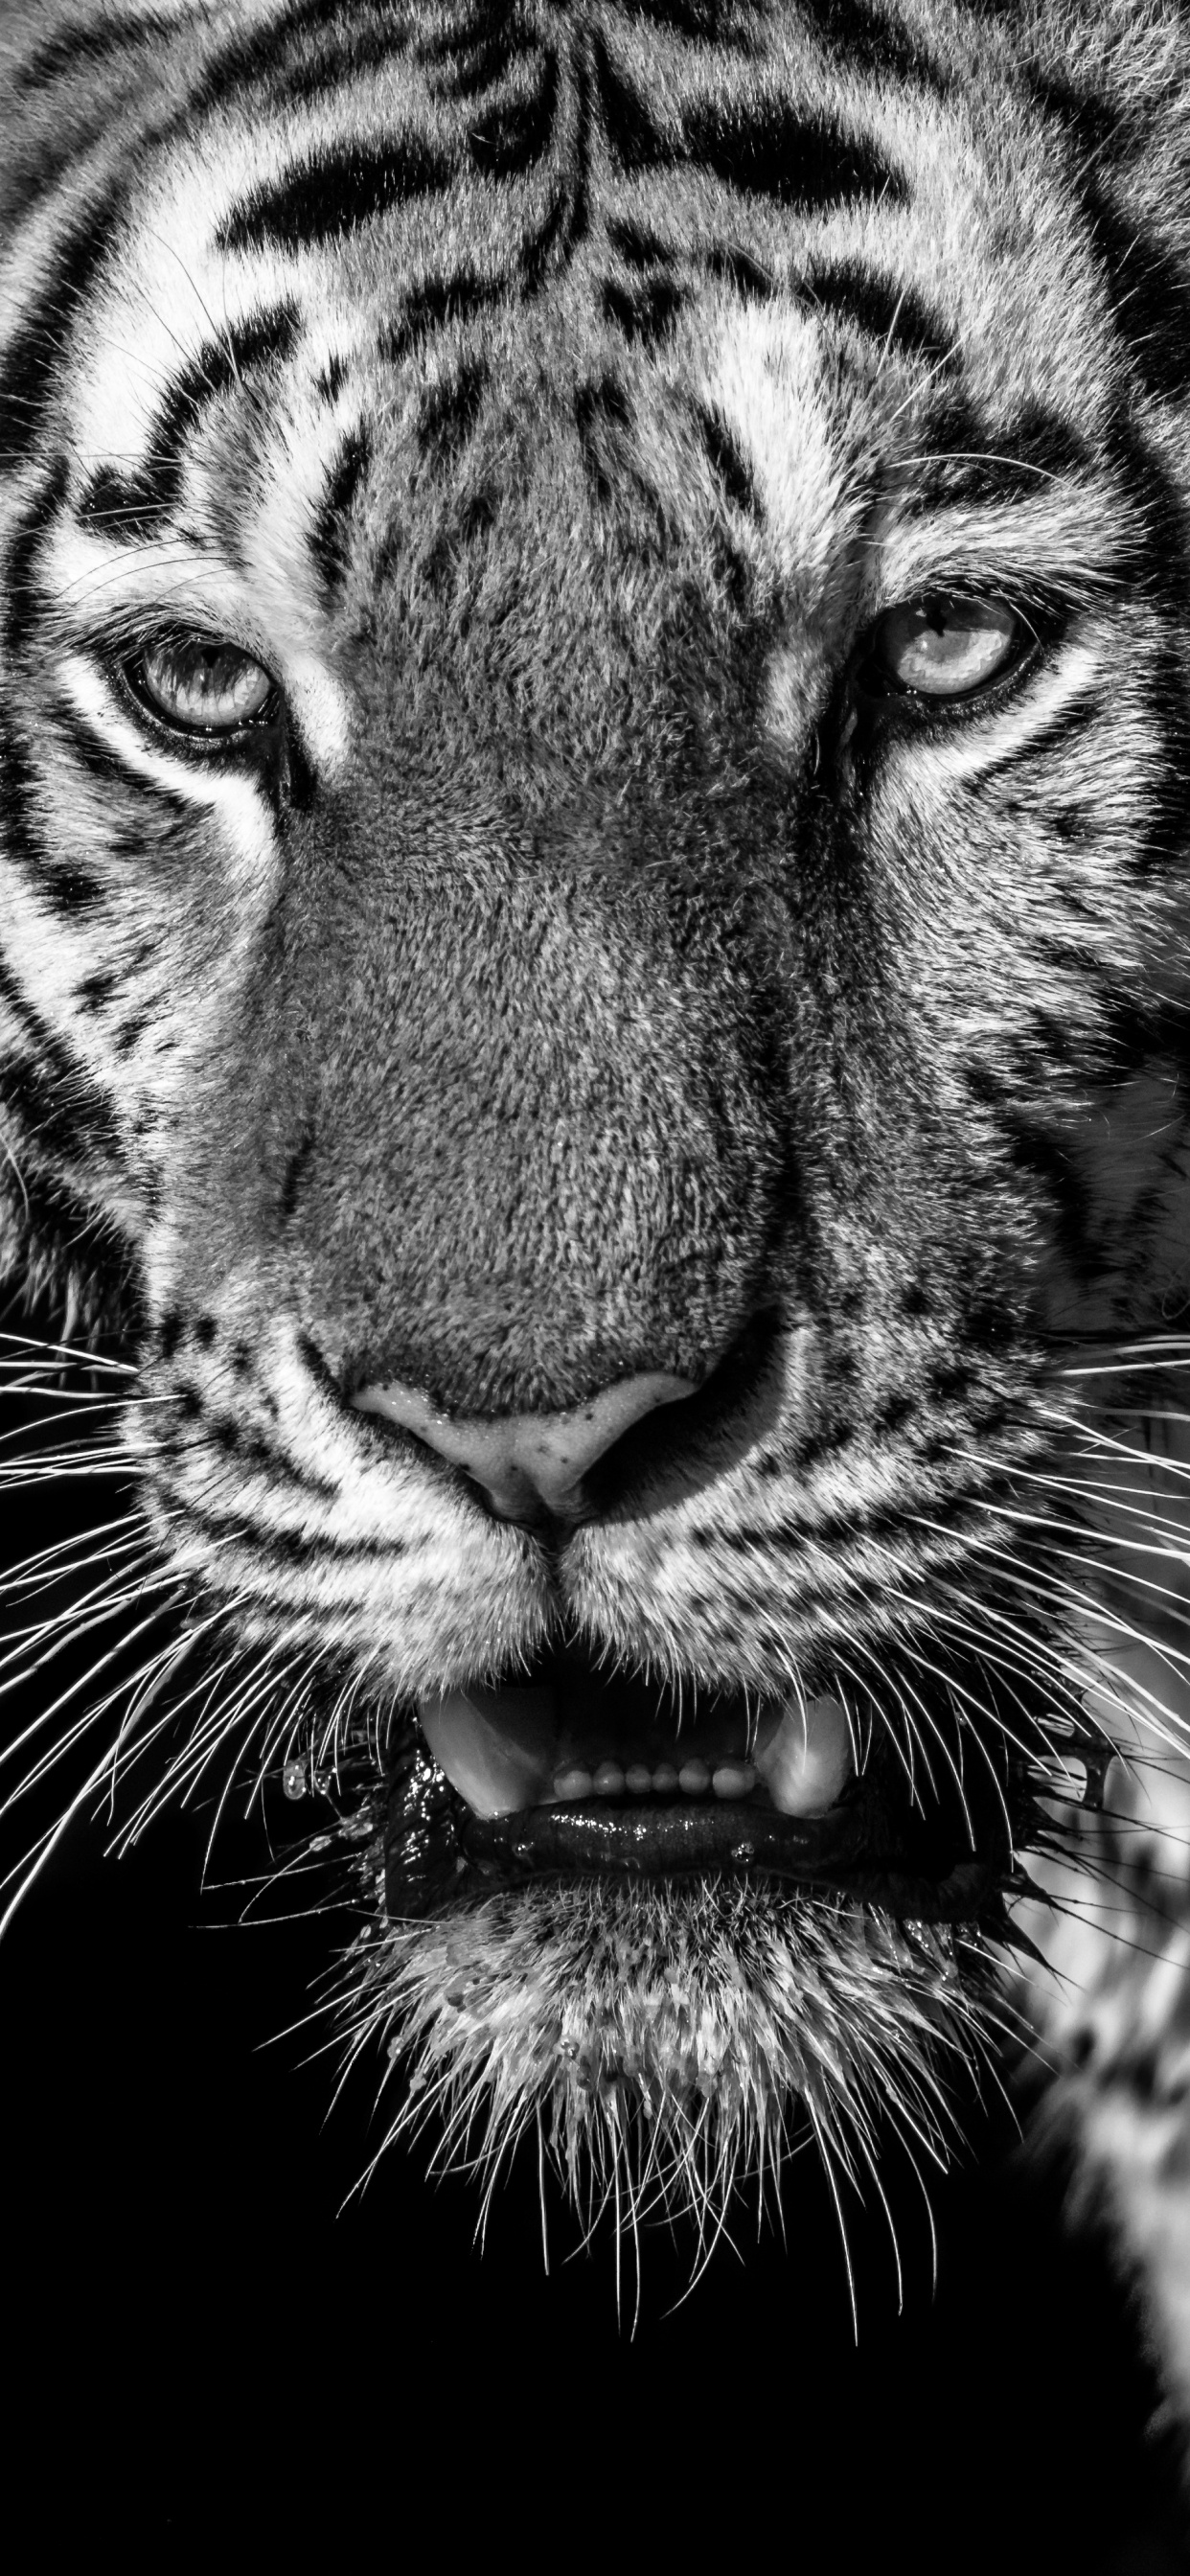 White and Black Tiger Illustration. Wallpaper in 1242x2688 Resolution